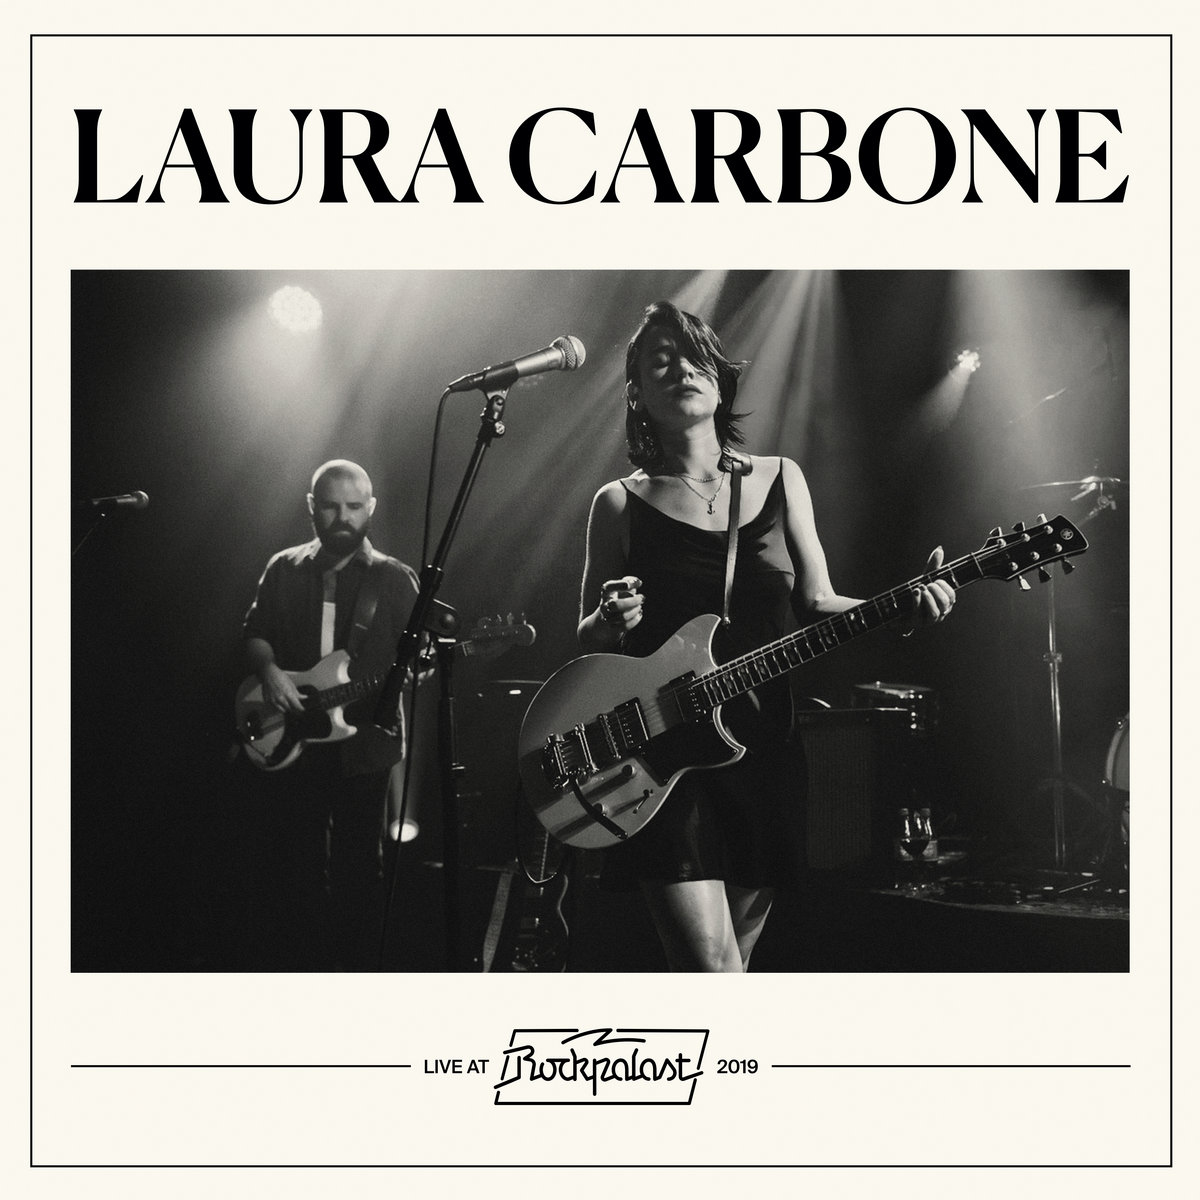 ALBUM REVIEW: Laura Carbone - Live At Rockpalast 